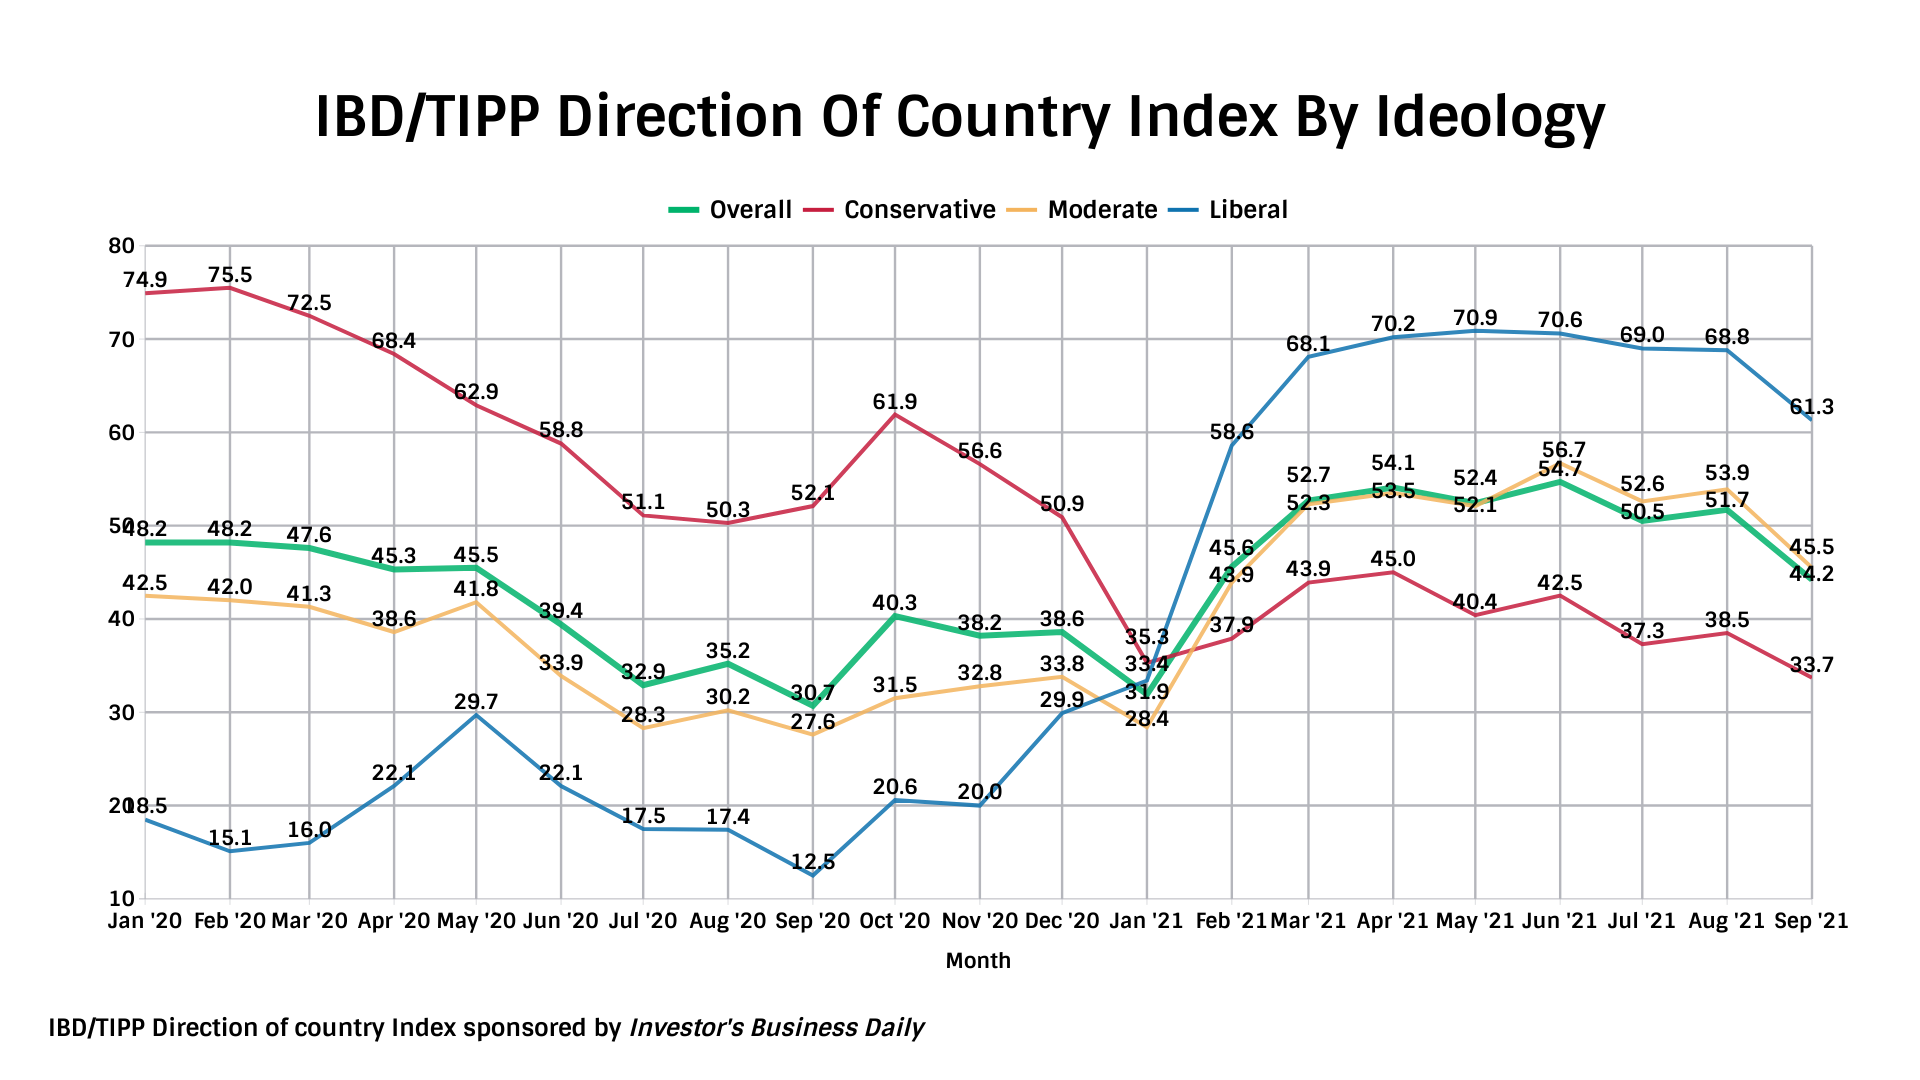 IBD/TIPP Poll Direction Of Country tracking chart along ideological lines